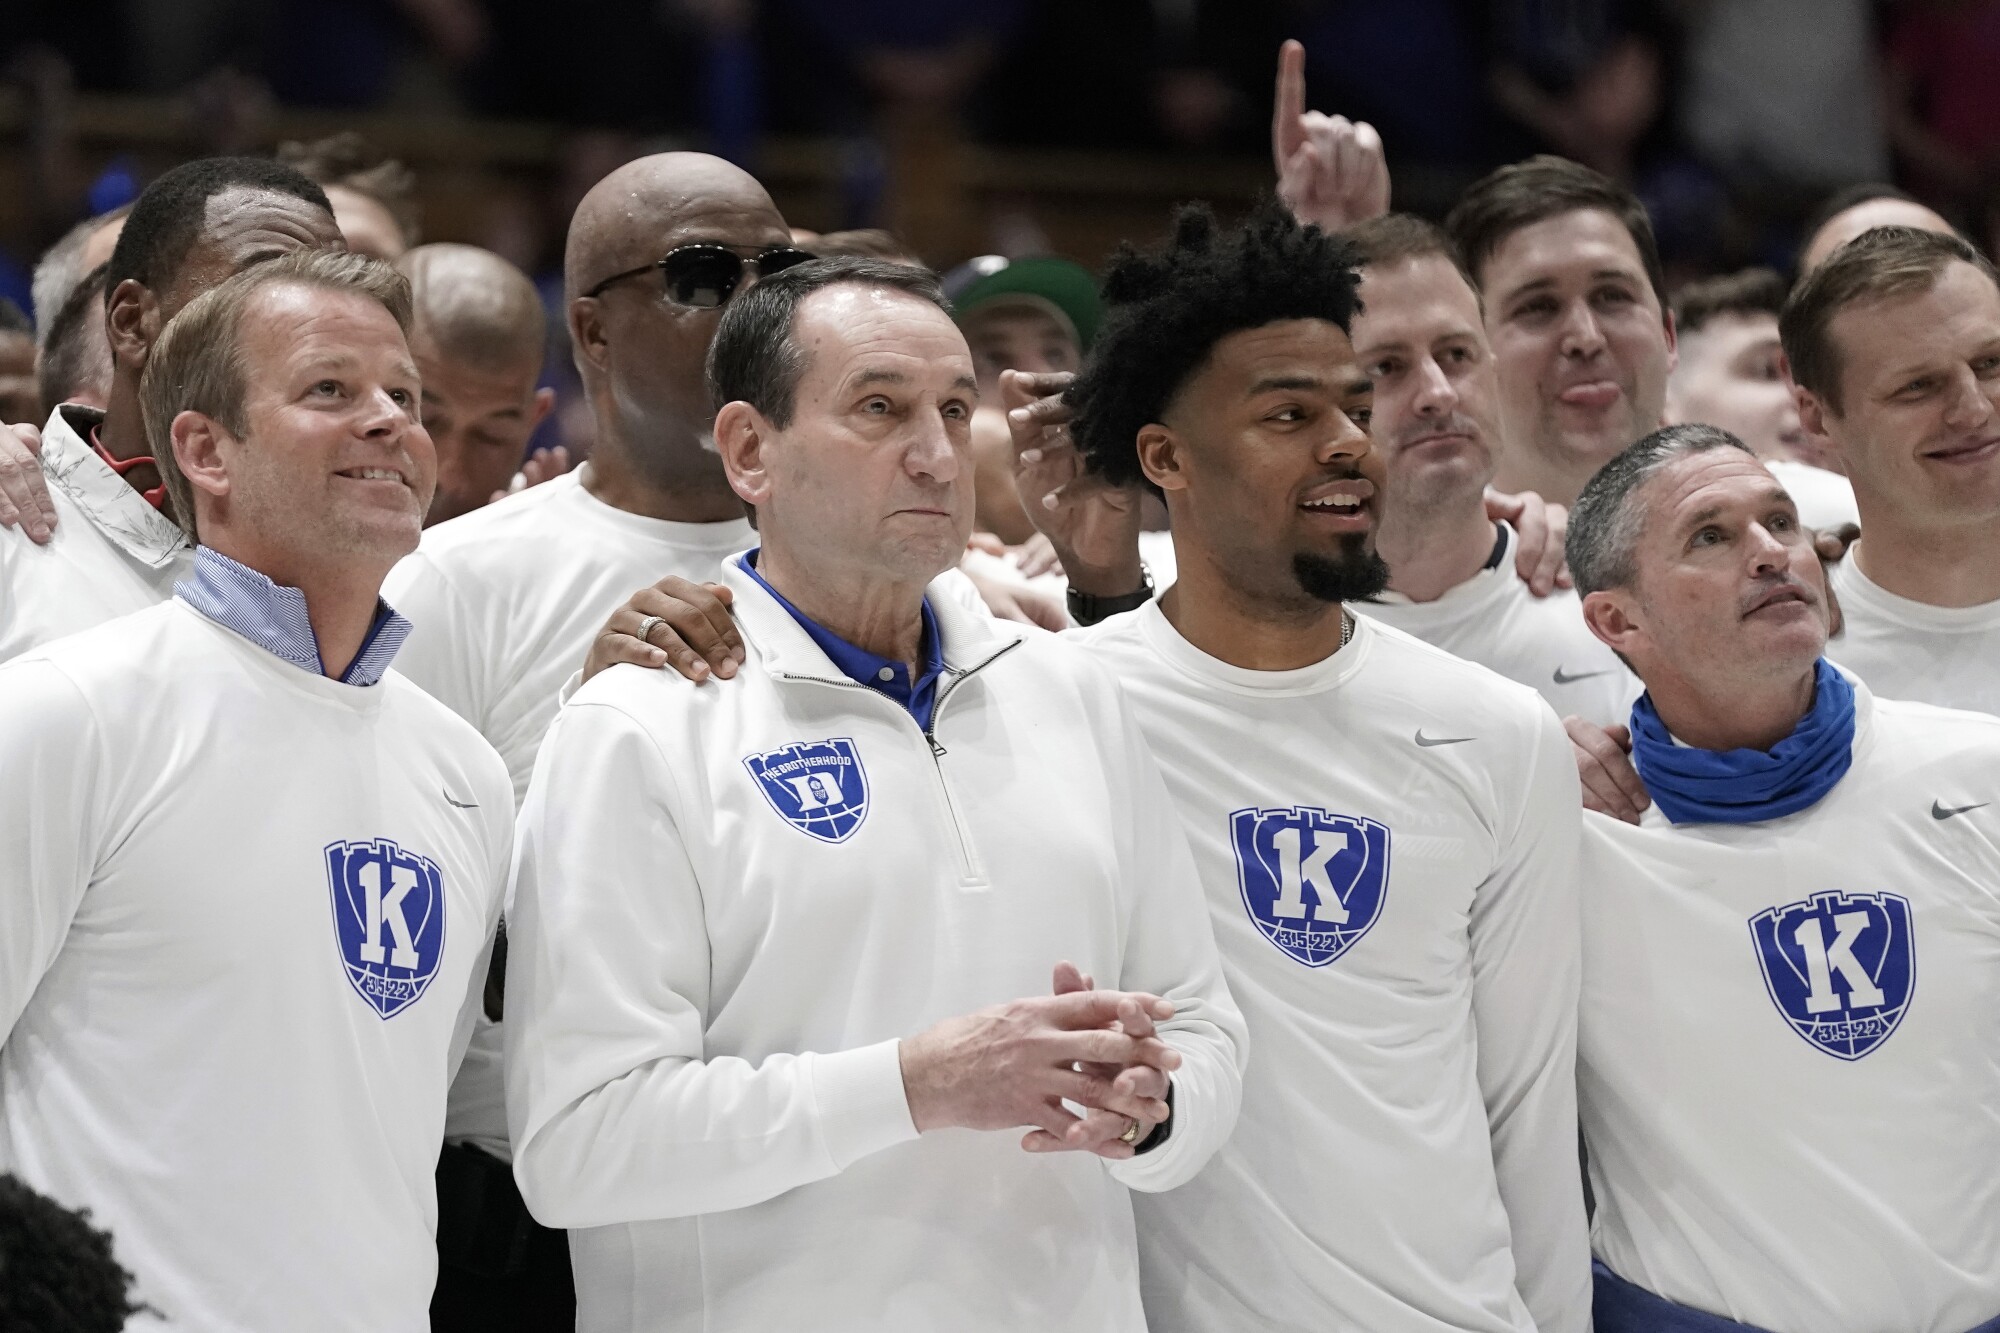 Duke coach Mike Krzyzewski, second from left, stands with his former players during a pregame ceremony Saturday.